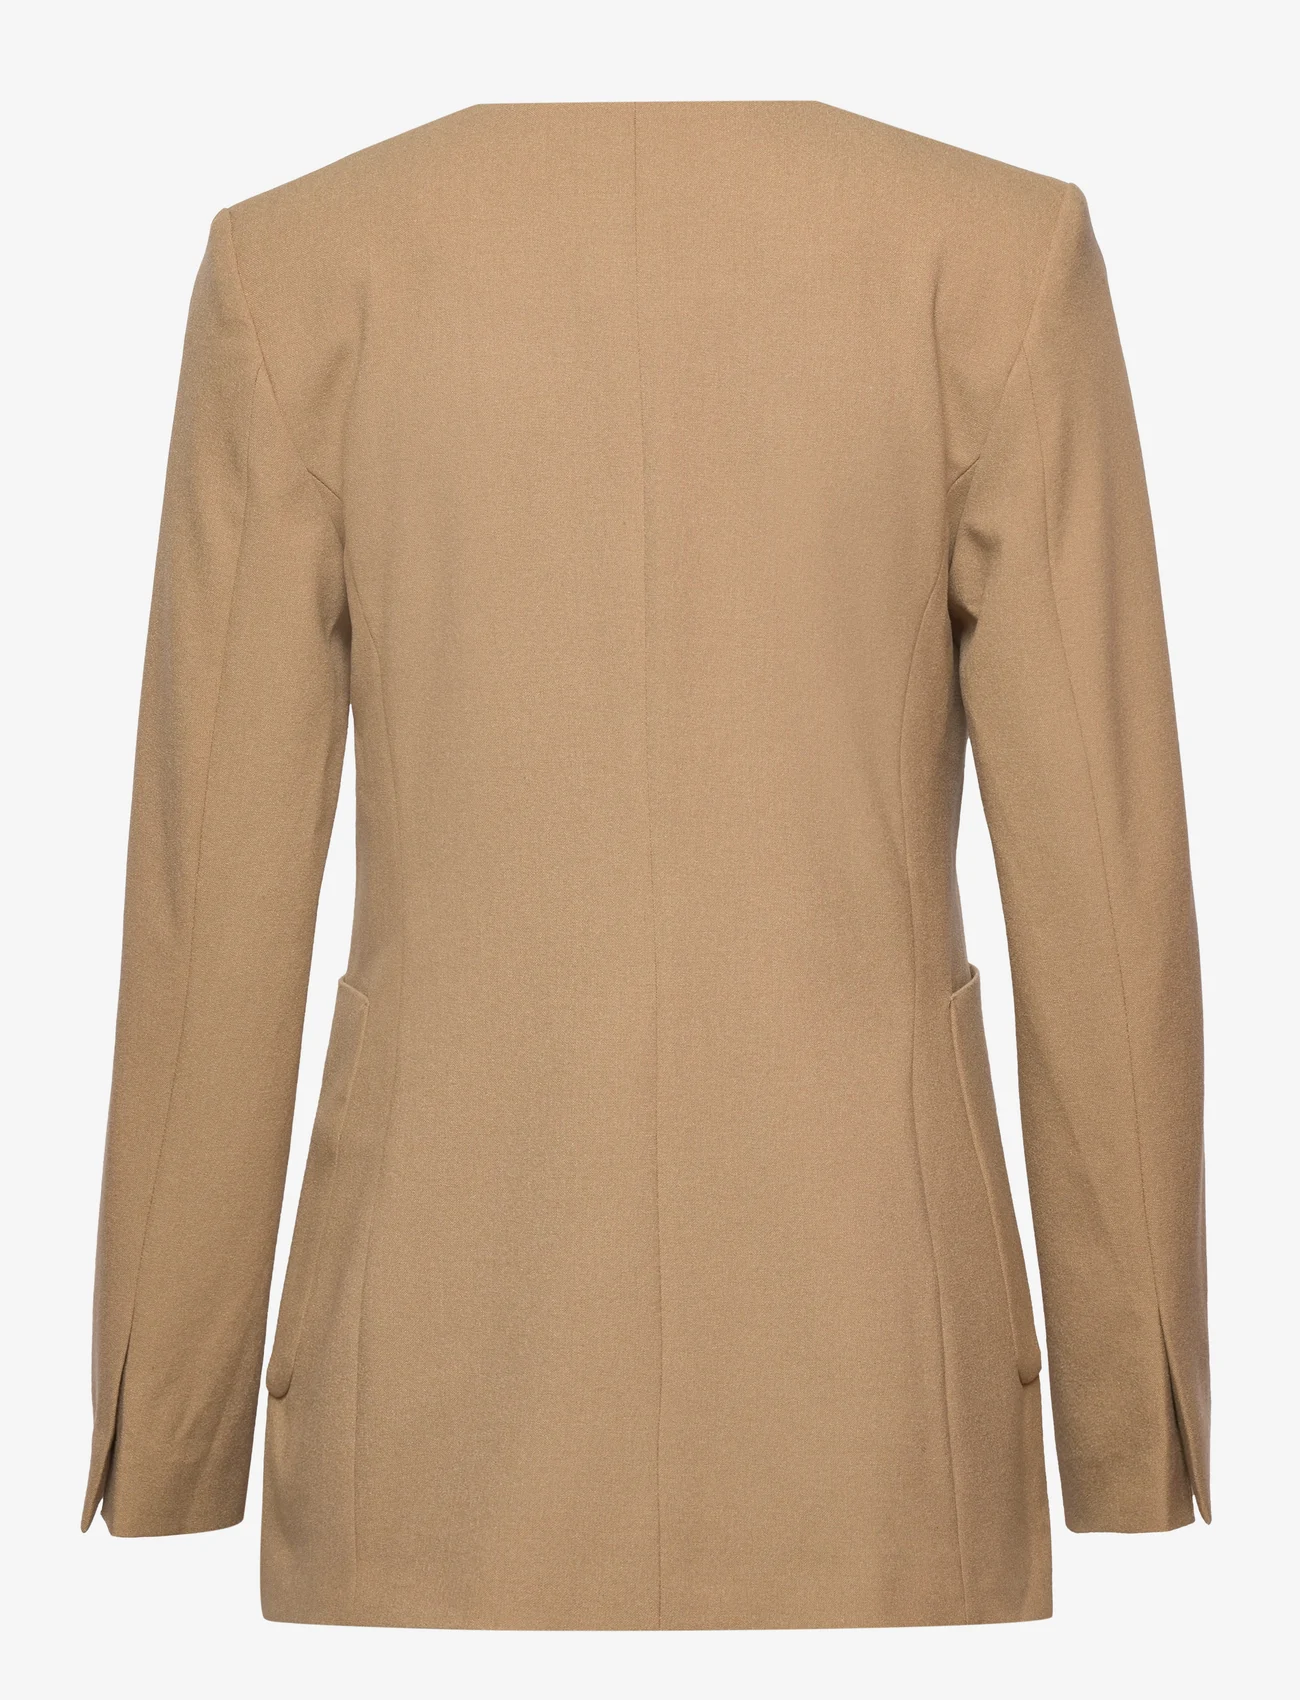 RODEBJER - Rodebjer Noomi - peoriided outlet-hindadega - camel - 1